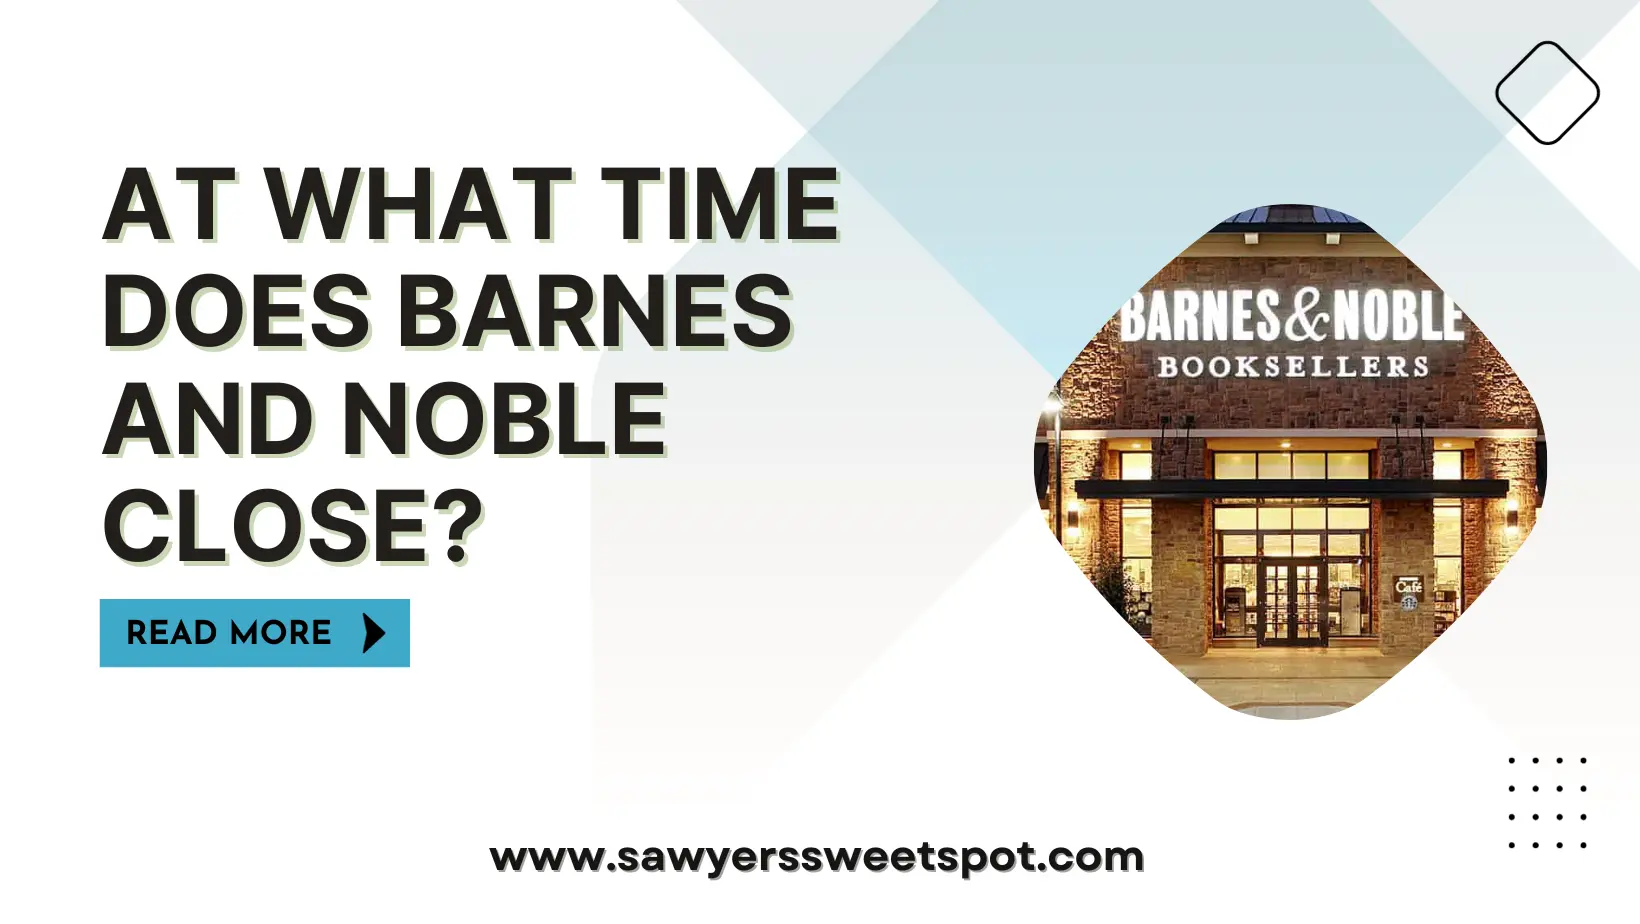 "At what time does Barnes and Noble close?" is a topic of interest for bibliophiles, cinephiles, gamers, and classes of people around the lifestyle of reading, trends, and entertainment. Are you planning a late-night movie date? Or are you searching for trending novels like "Night Watch, The Identity Trap, or The Enchanters"? Then the closest Barnes and Noble store should be your next stop point. You won't want to arrive at closing time when everyone is leaving and the doors are closed. Therefore, it's important to familiarize yourself with the working days and hours of Barnes and Noble. We recommend you continue reading for more info on the closing times. What is Barnes and Noble's Closing Time? There are a variety of opening and closing times for most Barnes and Noble stores. However, we are going to give you a breakpoint when you should expect most of their stores to start closing for the day. From 9 p.m. you should expect most of their stores to start closing though that might stretch till 12 a.m. depending on the particular store or their closing time for that day. For instance, Sunday closing time at some locations is the same as other days while other places close much earlier. Just like the closing time, there's no general opening time, most location opening time starts from 6 a.m. to 10 a.m. Within these hours, most Barnes and Noble stores are open while on Sundays, they open about 1 or 2 hours after the weekday opening time. What is Cinema Closing Time at Barnes and Noble? The store closing time is general and dependent on the store's management schedule. Whenever the general store closes, all other sections of the store close also. This also applies to gamers and other sections of the store. Therefore while visiting a Barnes and Noble store, it's important to know the exact closing time which is independent of a particular store at a time. What is the Holiday Hours at Barnes and Noble? Holidays are nice times to either read a book, watch a movie, or even play games and have fun all day long and Barnes and Noble offers all these services. But it's also pertinent to know the exact holidays to visit since they're not open during all holidays. Just like most public spaces, Barnes and Noble are usually closed on Christmas Day, Thanksgiving Day, and Easter Sundays. Aside from these days, you can always meet their stores open within their regular work hour of that store. You should also do deeper questioning on the operation hours on these various holidays that they work due to the fact that they have some holidays they close much earlier making them work fewer or extended hours than they should. What is the Closing Time on Independence Day? Today, the 4th of July is Independence Day and is celebrated nationwide as a holiday. You might be wondering if Barnes and Noble will be open since you are planning a movie and game time there later this evening. The very direct response is Yes they're open but happens to be one of those days you should make deeper inquiries about especially their closing time because they close much earlier than the regular time. By 6 p.m., most Barnes and Noble stores are closing for the day because they don't run full or regular-time operations on Independence Day. More of these days are: 1. New Year's Day (1st of January) 2. Black Fridays (Fridays in Nov) 3. Christmas Eve (24th Dec) 4. Boxing Day (26th Dec) 5. New Year's Eve (31st Dec) What is Barnes and Noble's Closing Time for Orders? Barnes and Noble hold a customer's order for up to 5 days after which it is closed. Once an order is canceled and closed, the store returns the item(s) to the inventory thereby making it available for another interested customer to order it. in the same vein, if you wish to get your order quickly enough, you should order early and get it before the next 24 hours but if the order has to be shipped, it will take between 3 to 6 business days to arrive. What is the Barnes and Noble Customer Care Closing Time? The physical store representative closes each day at the same time the store at that location decides to close. You can get to talk with the online representatives of Barnes and Noble from 9 a.m. to 9 p.m. all through the week. While reaching out to customer care within these hours, it is important you make your complaints or inquiries brief and simple to understand so they can help you or refer you to the right platform that will help you. READ ALSO: At What Time Does the Mall Close? At What Time Does Fedex Close? At What Time Does Cricket Close? At What Time Does Verizon Close? How to Contact a Customer Care Representative. Within these hours, you can contact them through their free toll number 866-238-7323, or  800-295-3029 for their gift cards and other related issues. Contact them through their e-mail address or other social media platforms. Their web address and mobile app is another way to contact their customer care and through them, you could know more about the closing time of the store. How to Find a Store It can be really difficult if you can navigate your phone properly. By making use of the Store Finder or Google Maps, you are sure to locate Barnes and Noble stores around you for your needs. The Mobile App also is a good way to find one since it can populate different store locations including their different current times and hours of operation. In summary, the crumbs and crannies of this are to serve as a guide and assist you in planning a visit to a store of your choice and a way to know the perfect work hours of that store since they all don't work at the same time. You should always be in close alliance with the customer care representative of the Barnes and Noble store around your locations so as not to miss out on any movie or appointment you plan to have at the location.